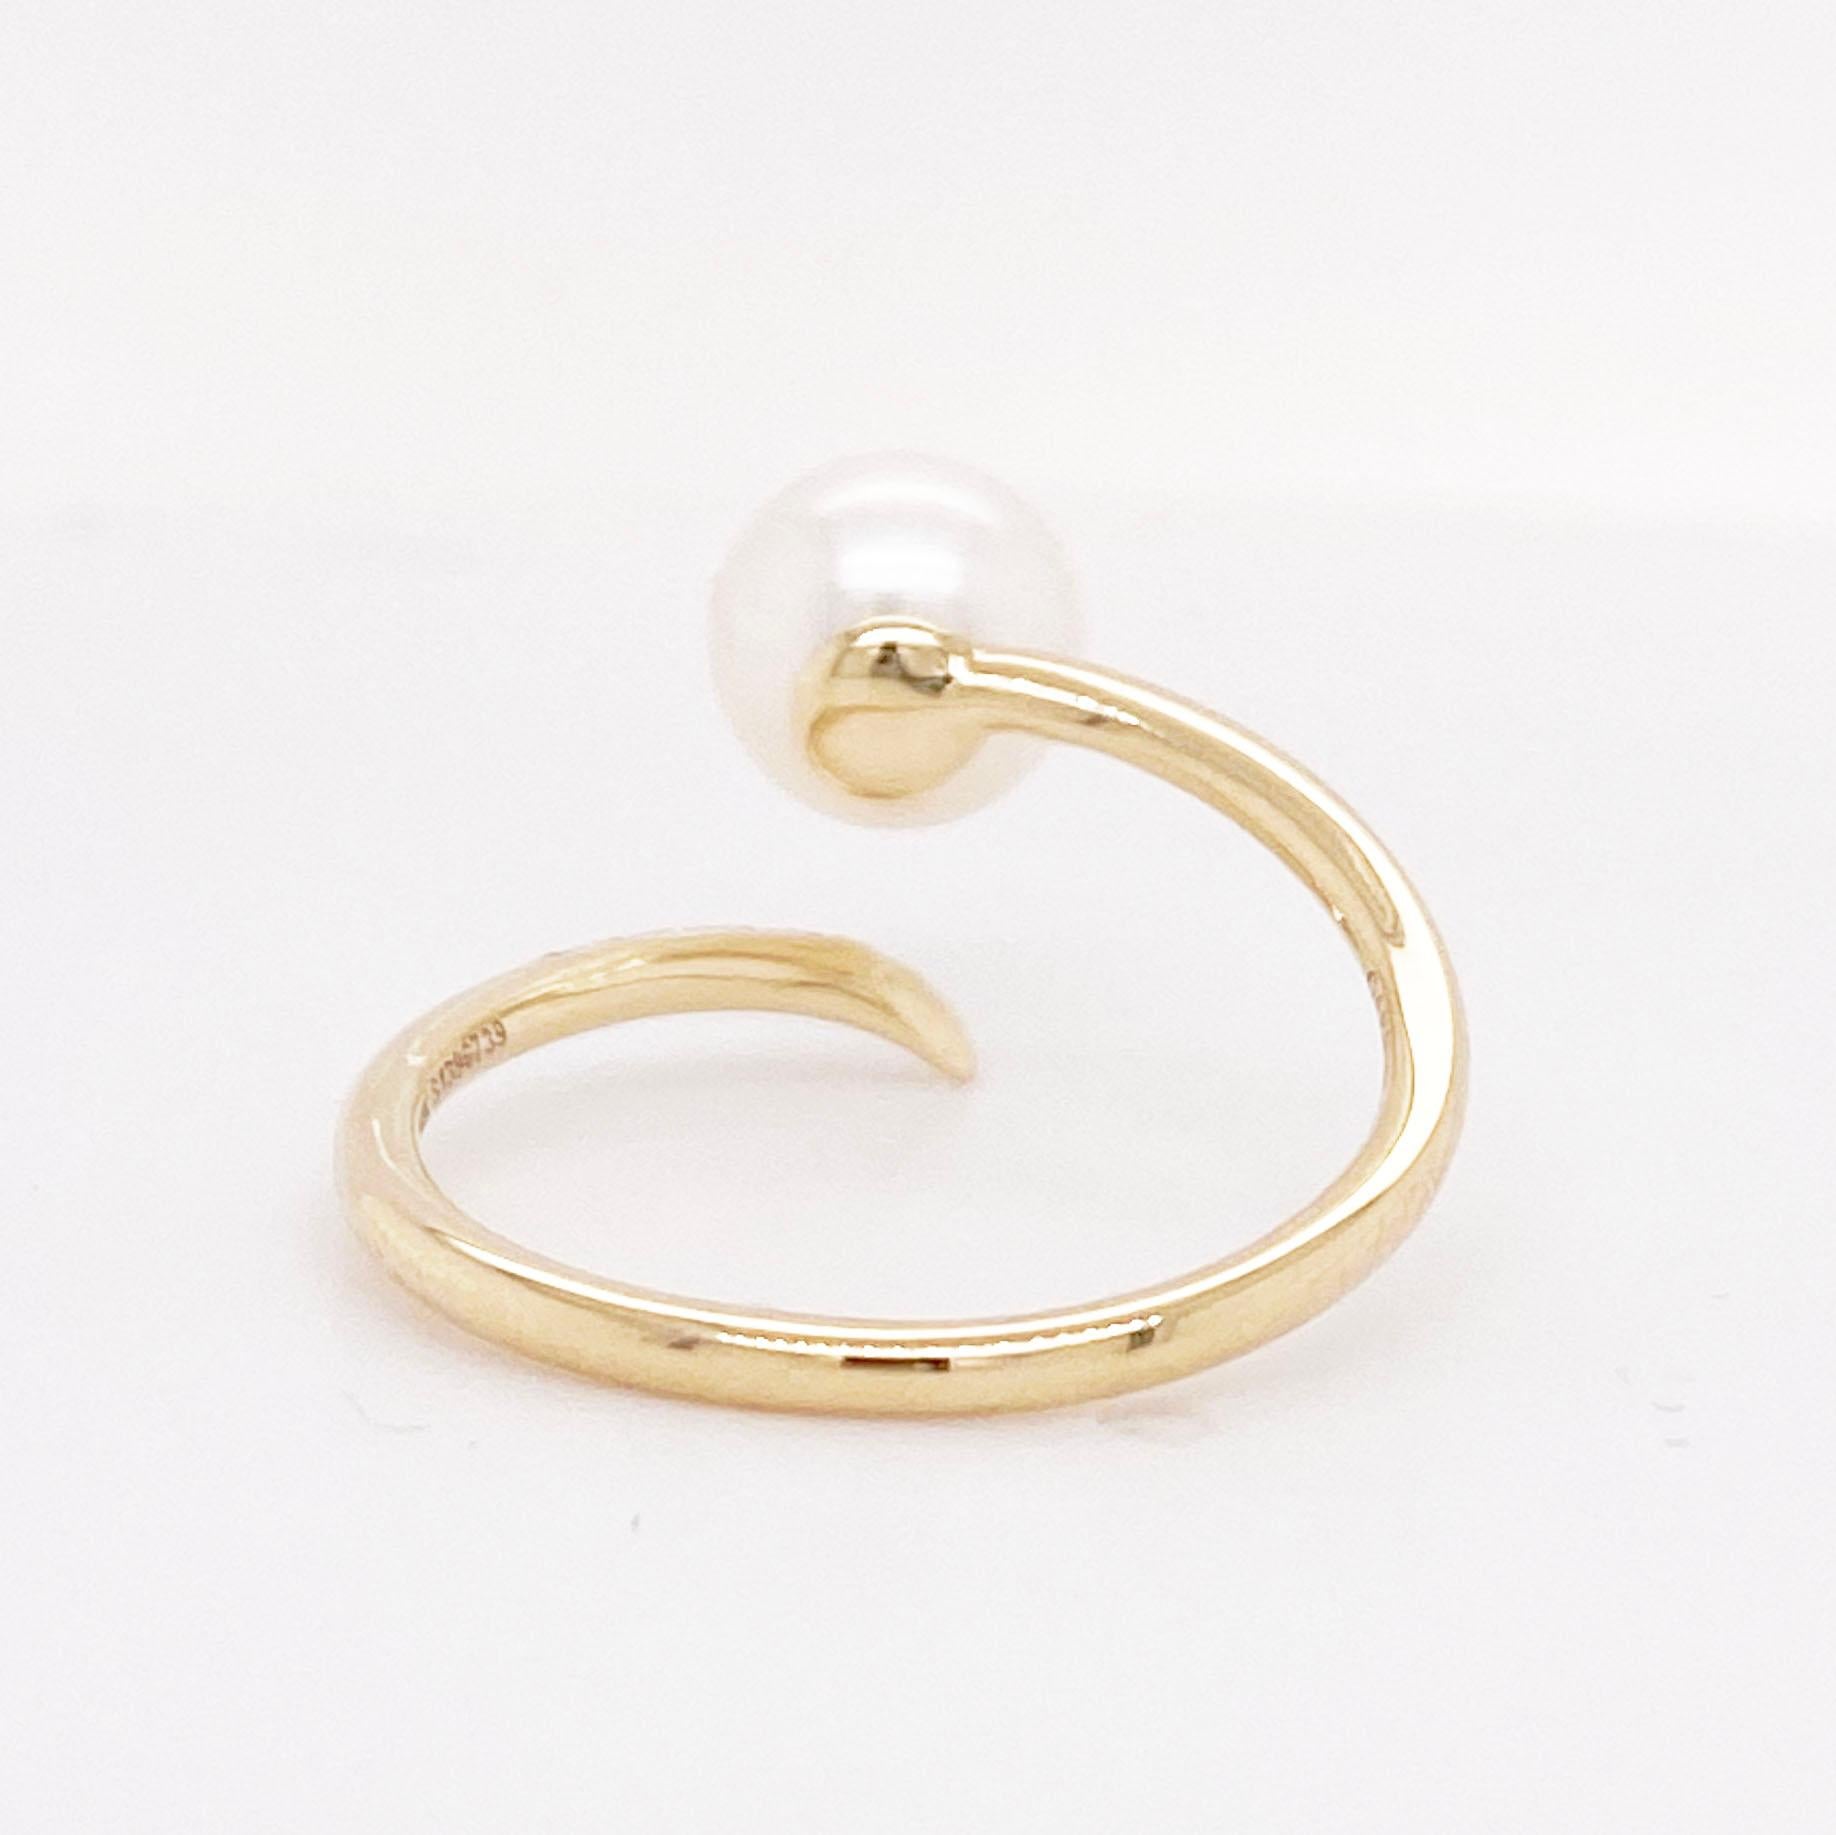 Pearl Diamond Ring w Bypass Assymetrical Design Open Wrap Ring, 14K Yellow Gold 3